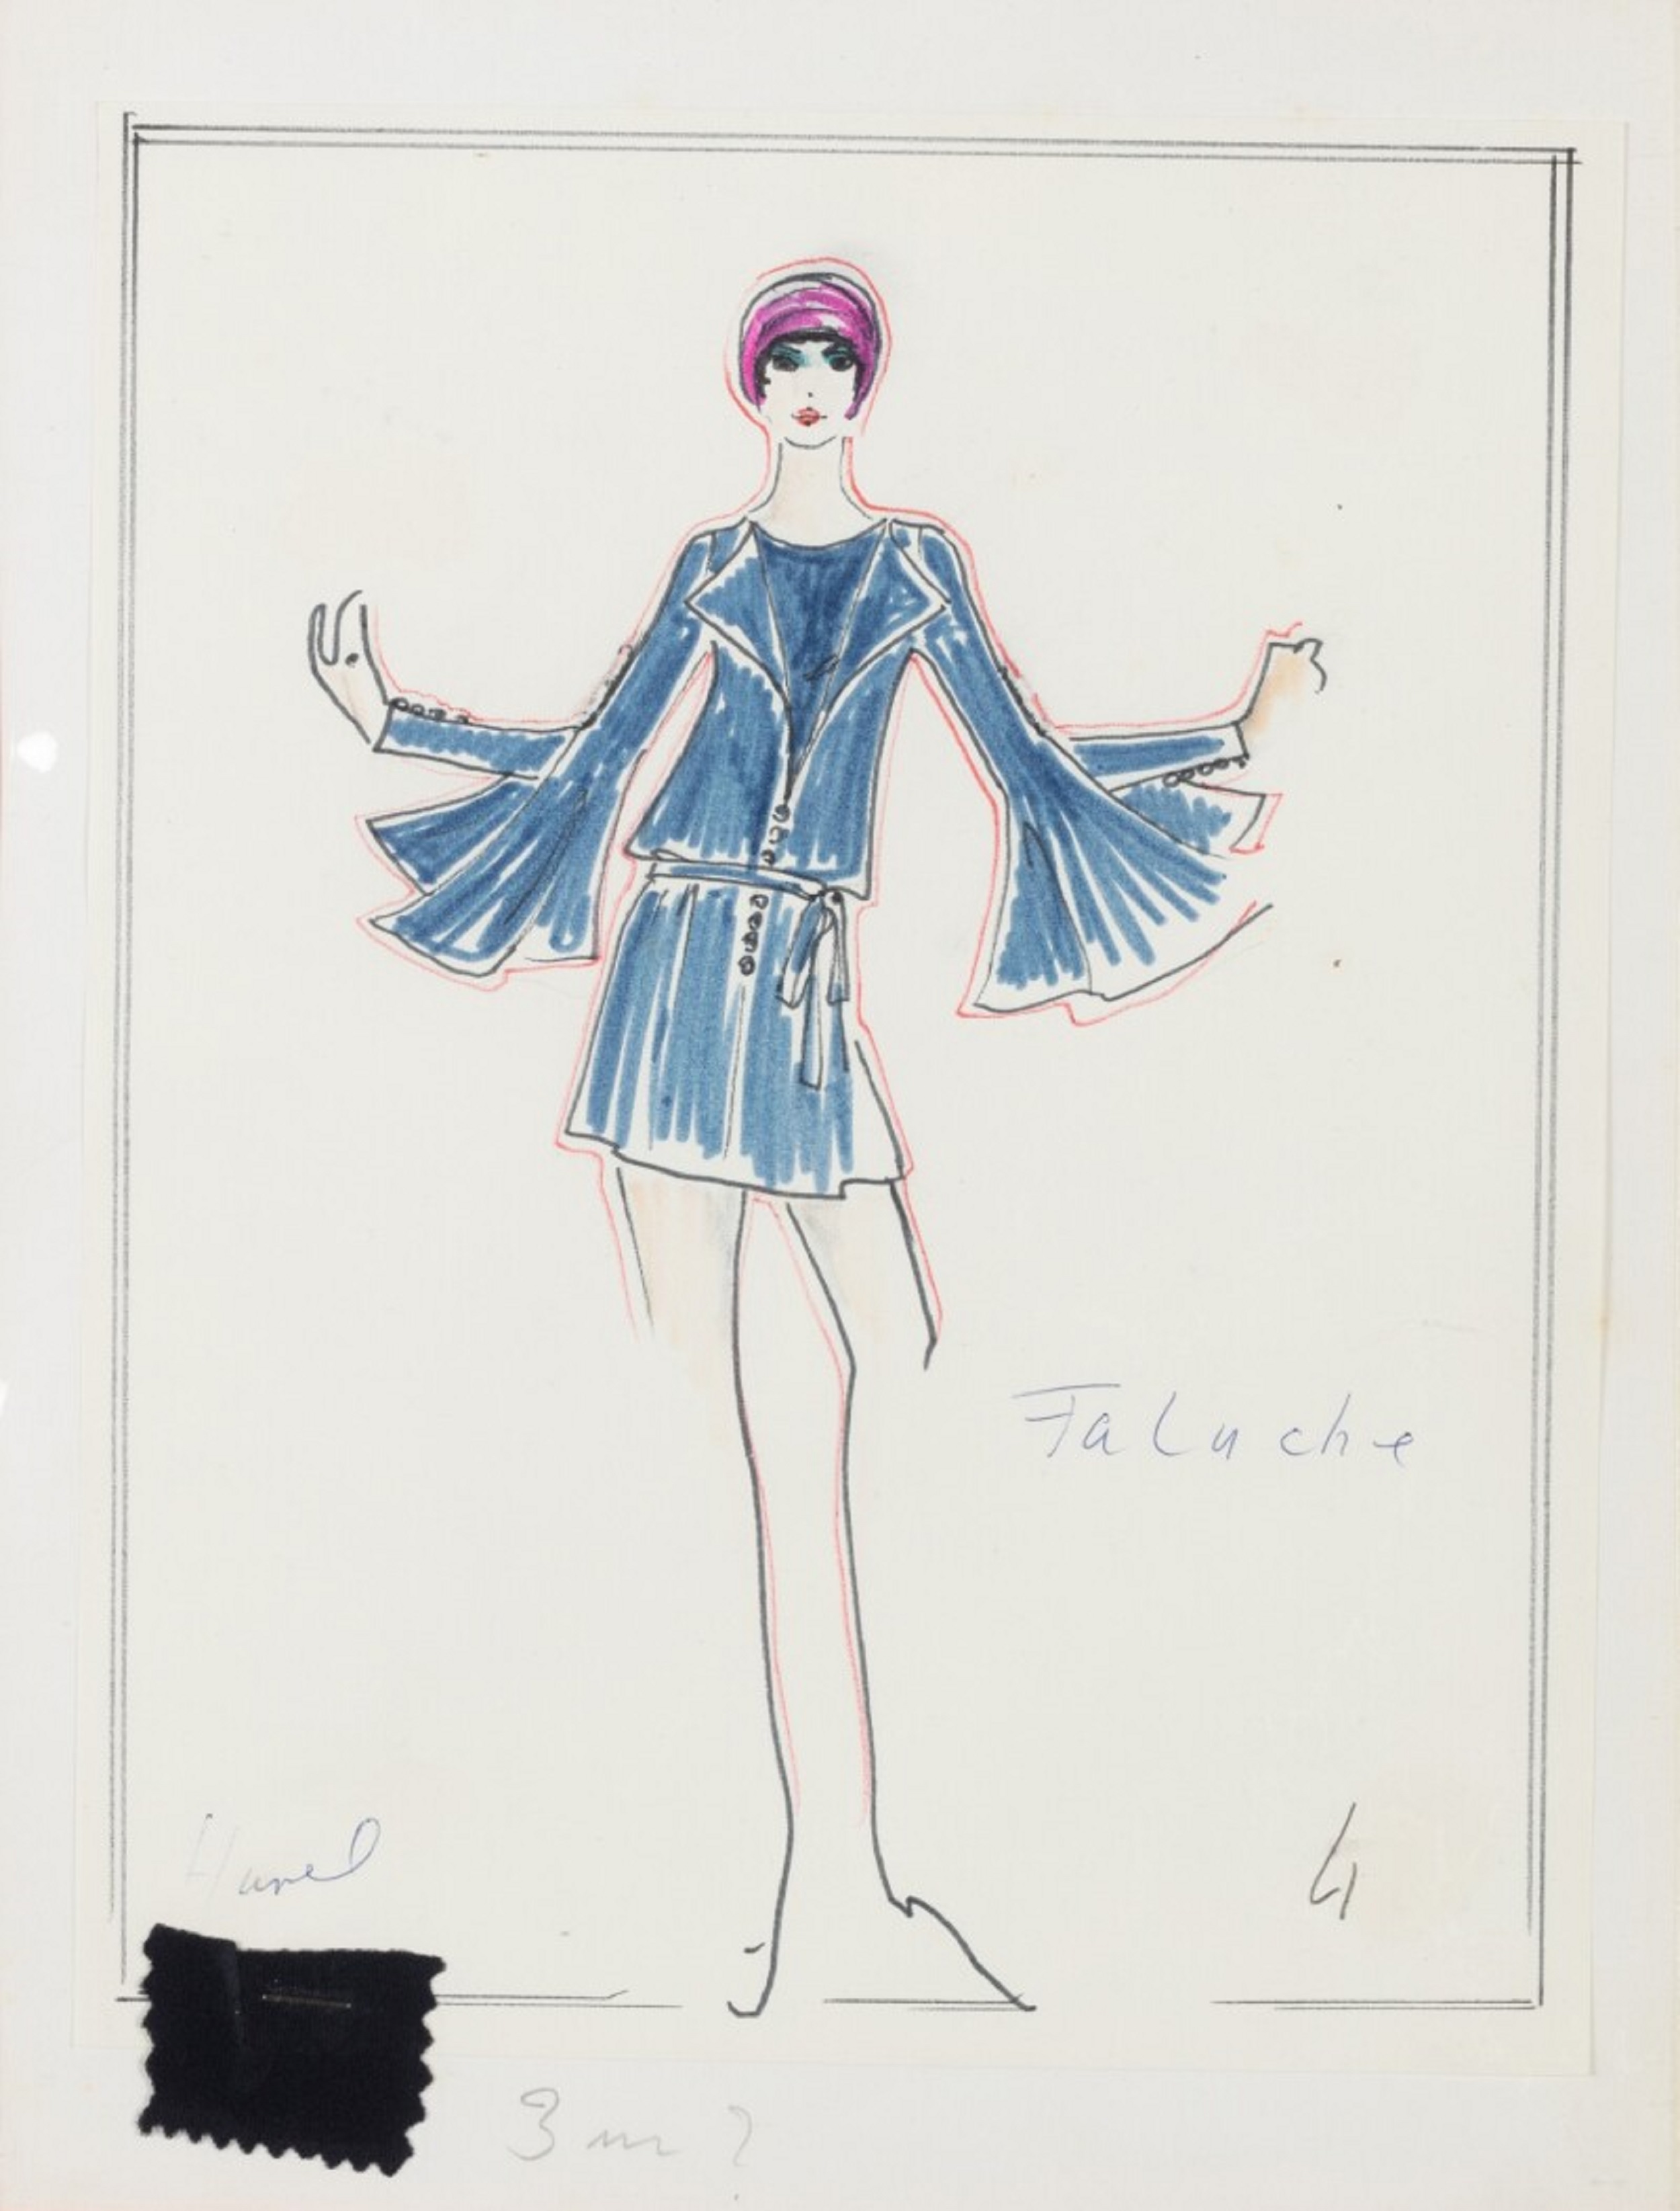 125 Karl Lagerfeld Sketches—Including 2 Of Elizabeth Taylor—On Auction